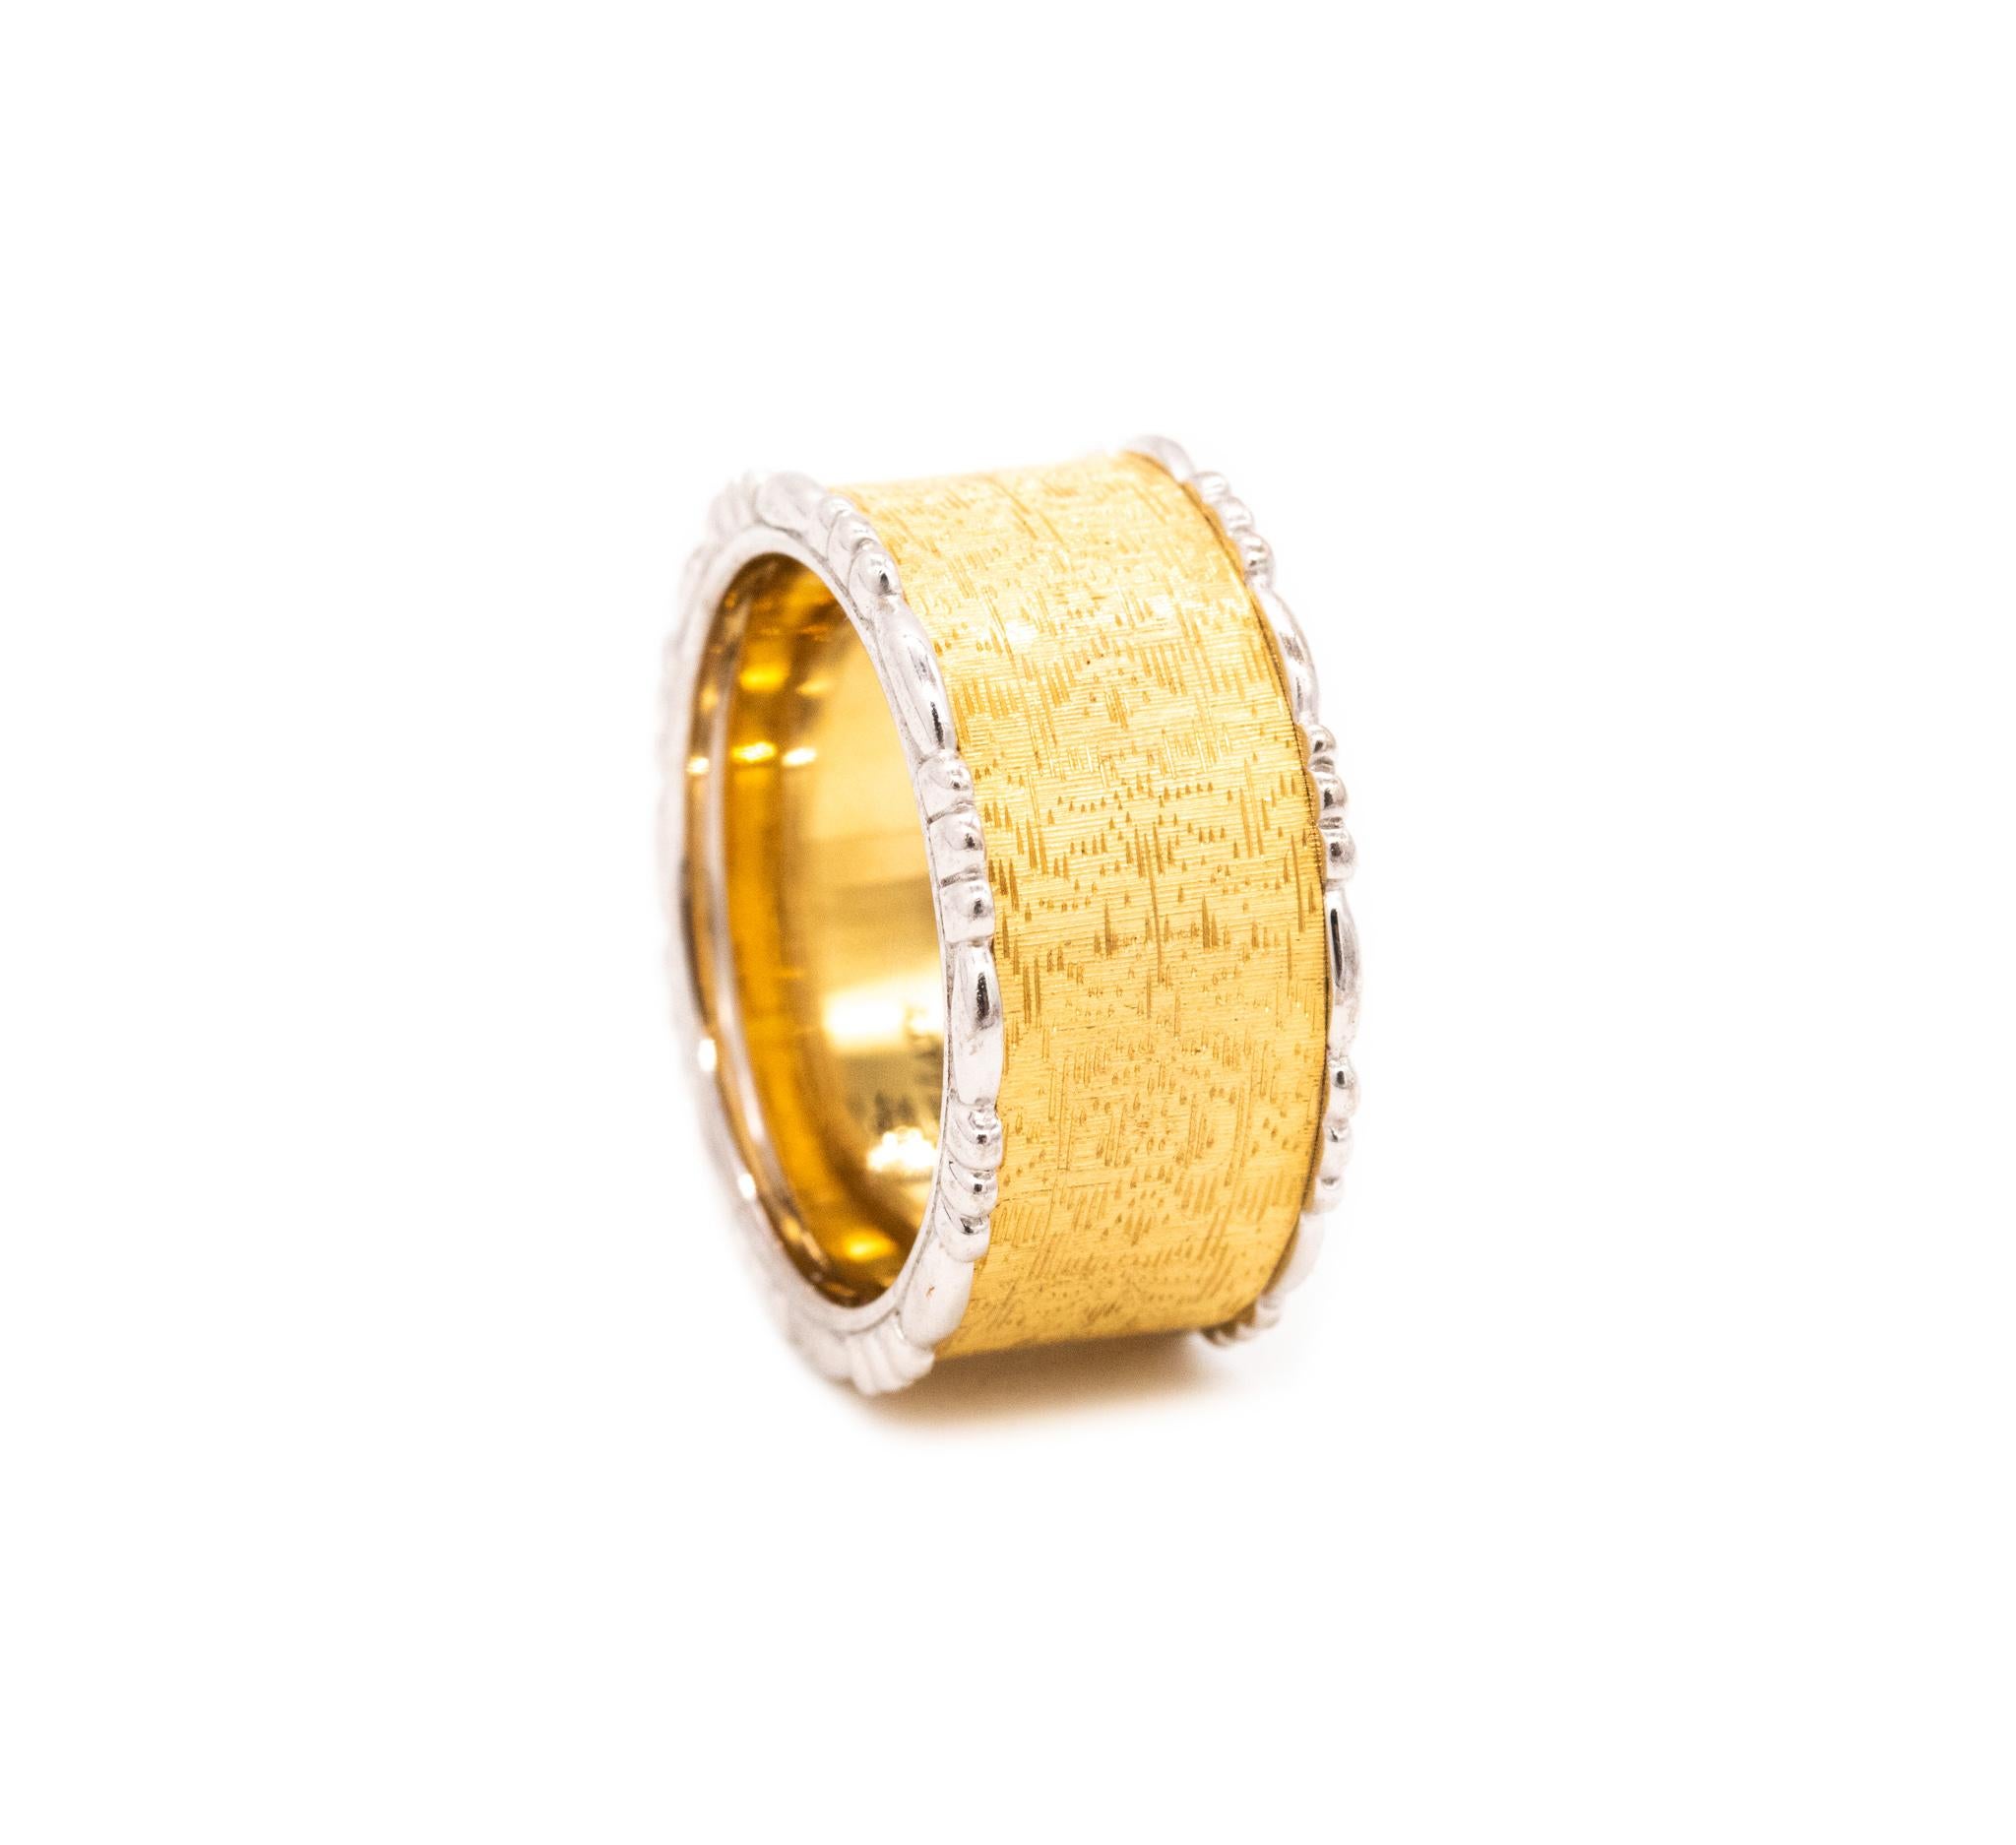 Buccellati Milano Ring Band in Brushed 18Kt Yellow and White Gold 3